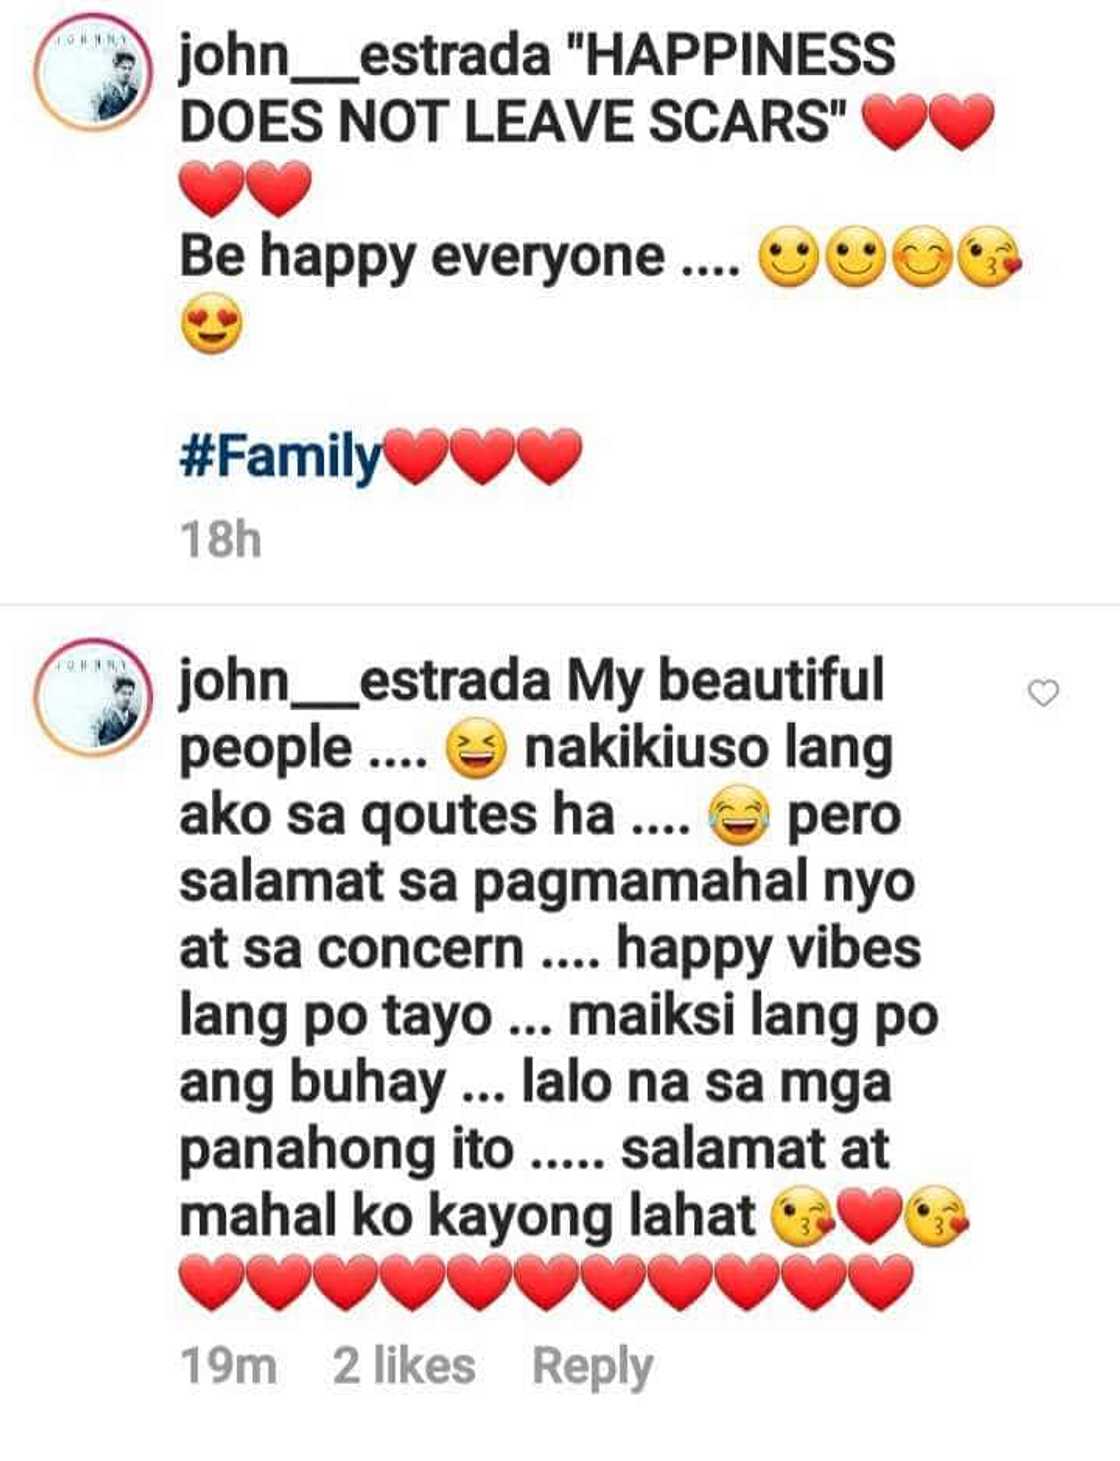 John Estrada posts about “happiness” amid issue with Derek Ramsay